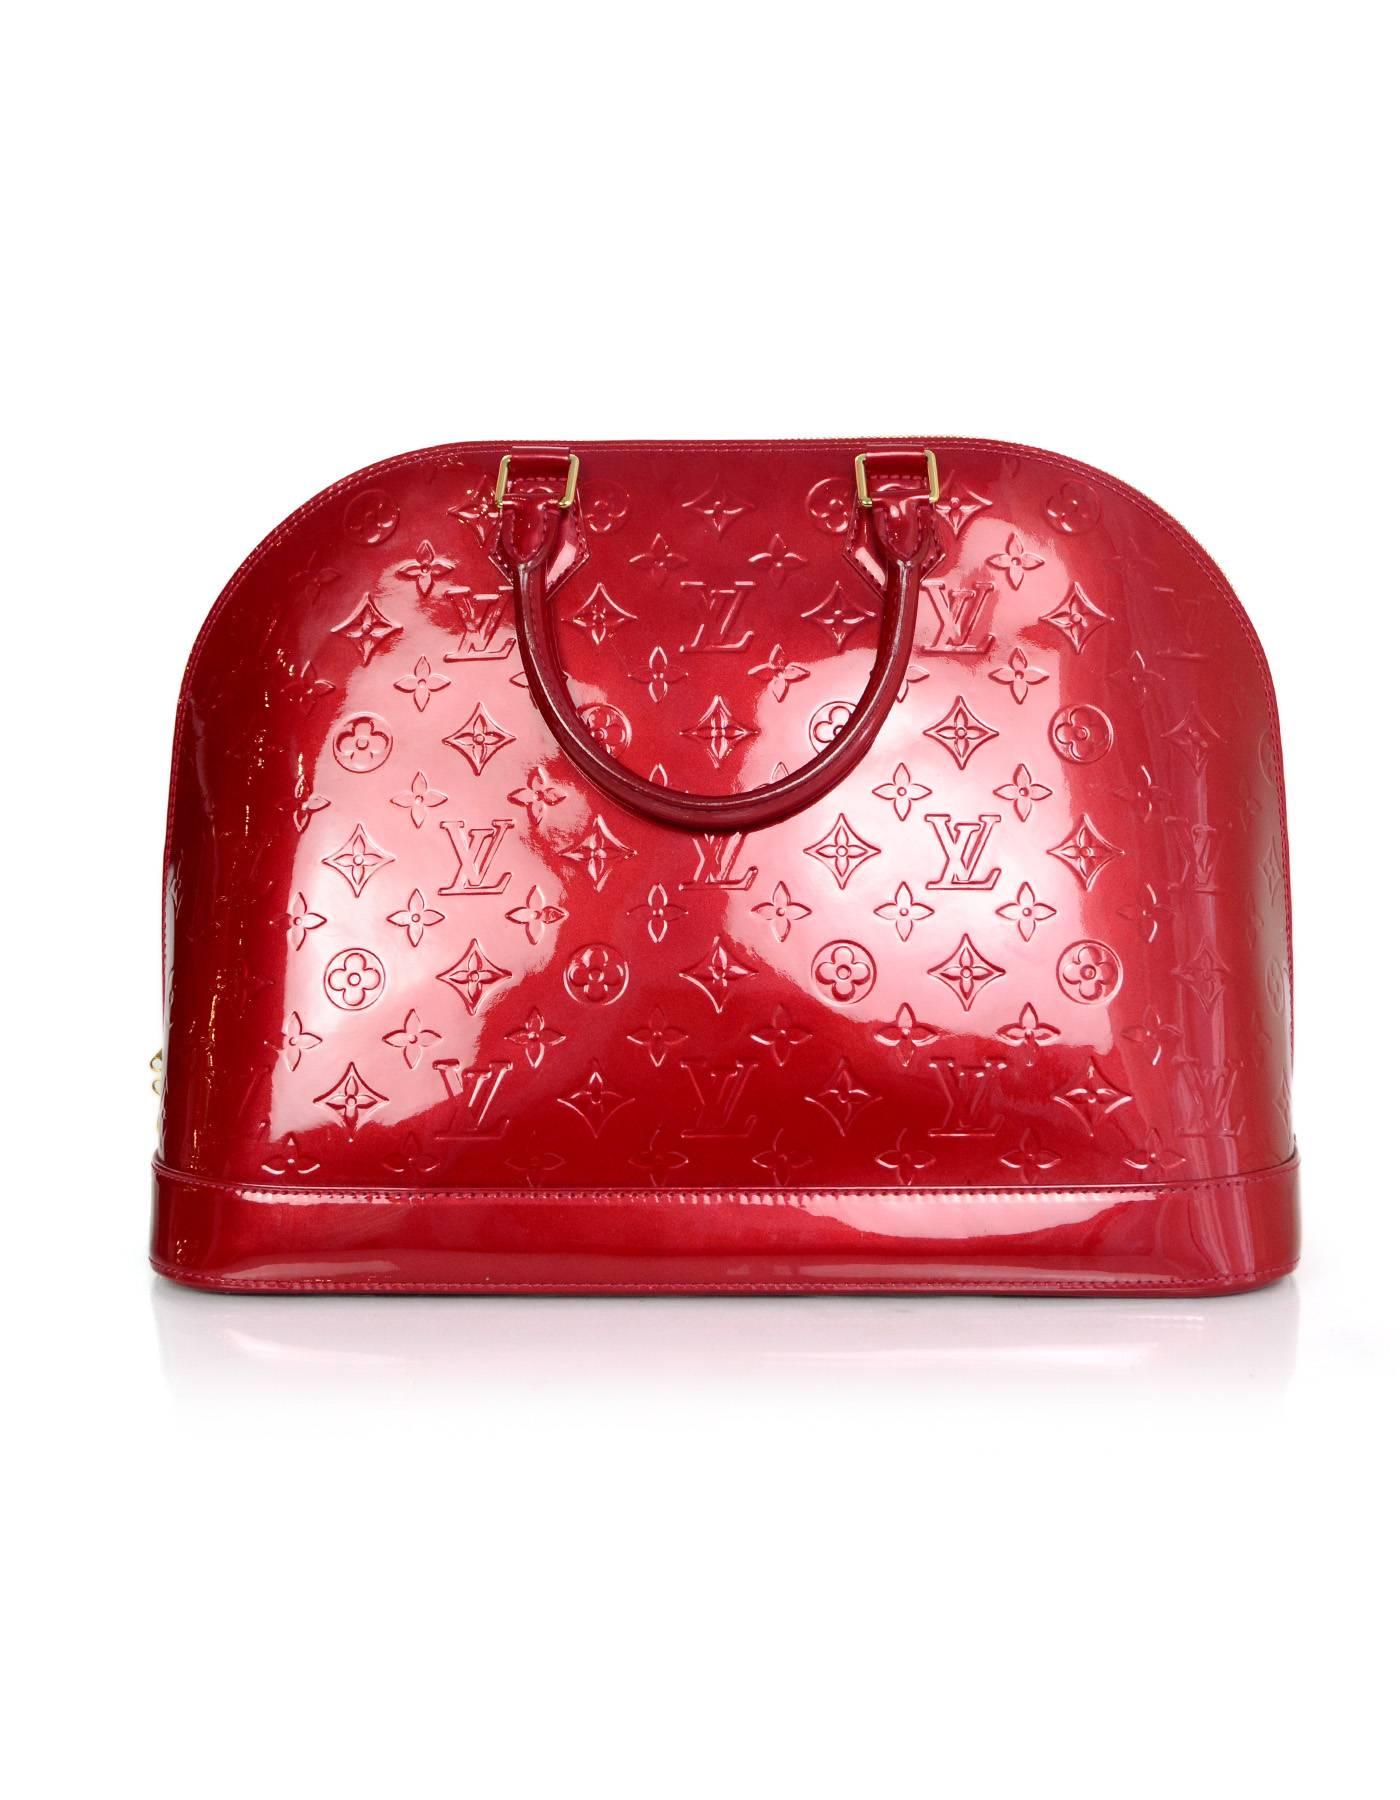 Louis Vuitton Pomme d'Amour Red Monogram Vernis Alma GM

Made In: France
Year of Production: 2010
Color: Pomme d'Amour Red
Hardware: Goldtone
Materials: Vernis leather (patent leather)
Lining: Red canvas
Closure/Opening: Double zip around